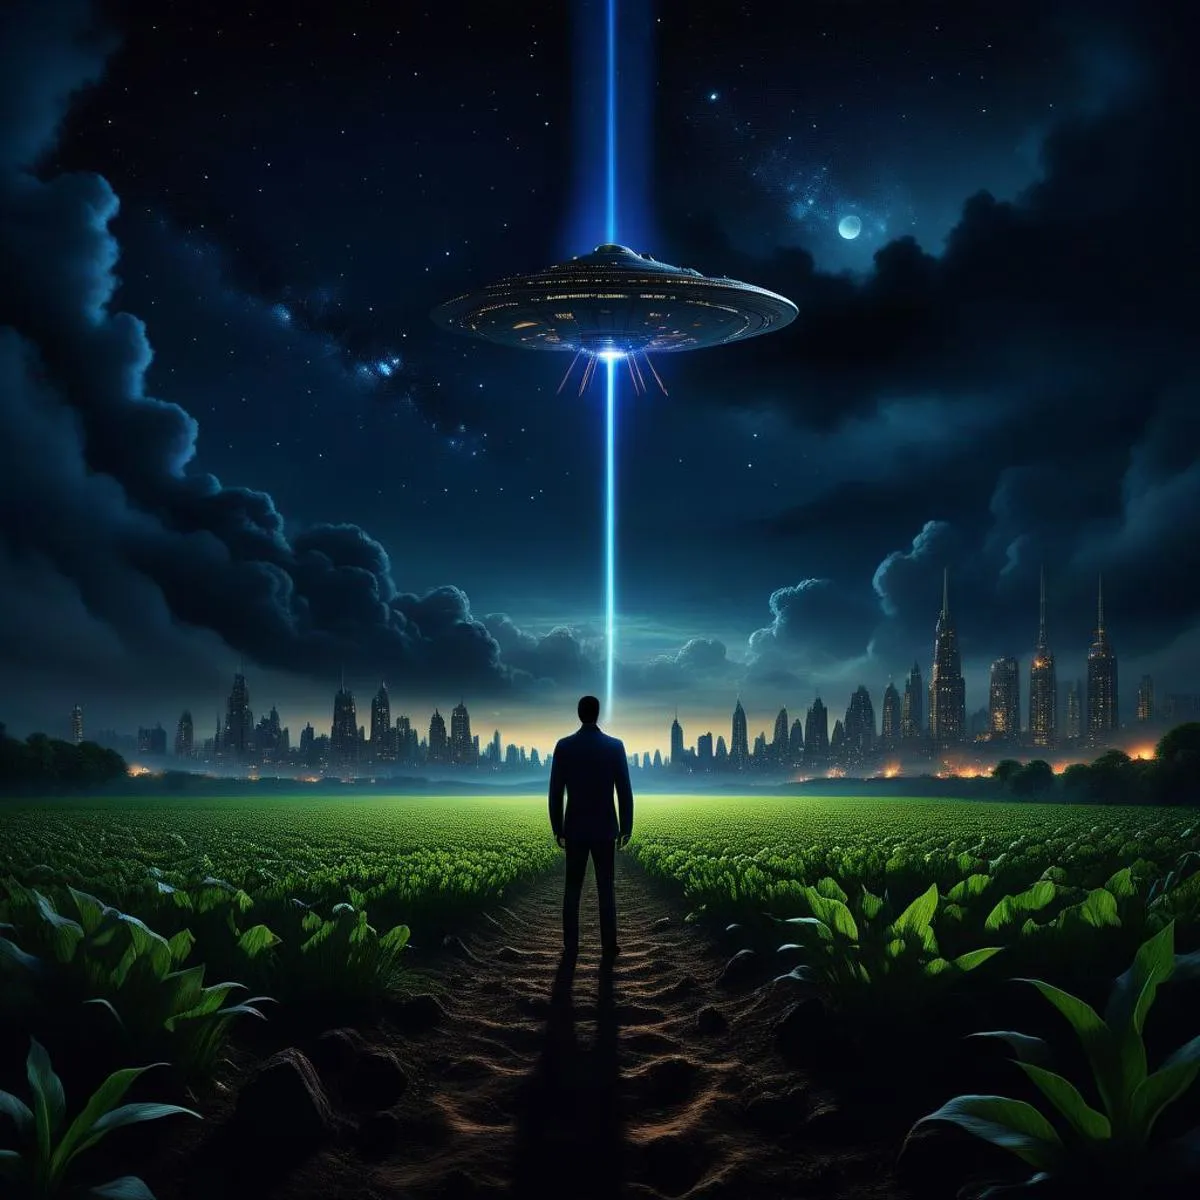 A silhouette of a person standing in a field at night, looking at a hovering UFO emitting a beam of light, with a distant cityscape under a starry sky in the background. AI-generated image using Stable Diffusion.